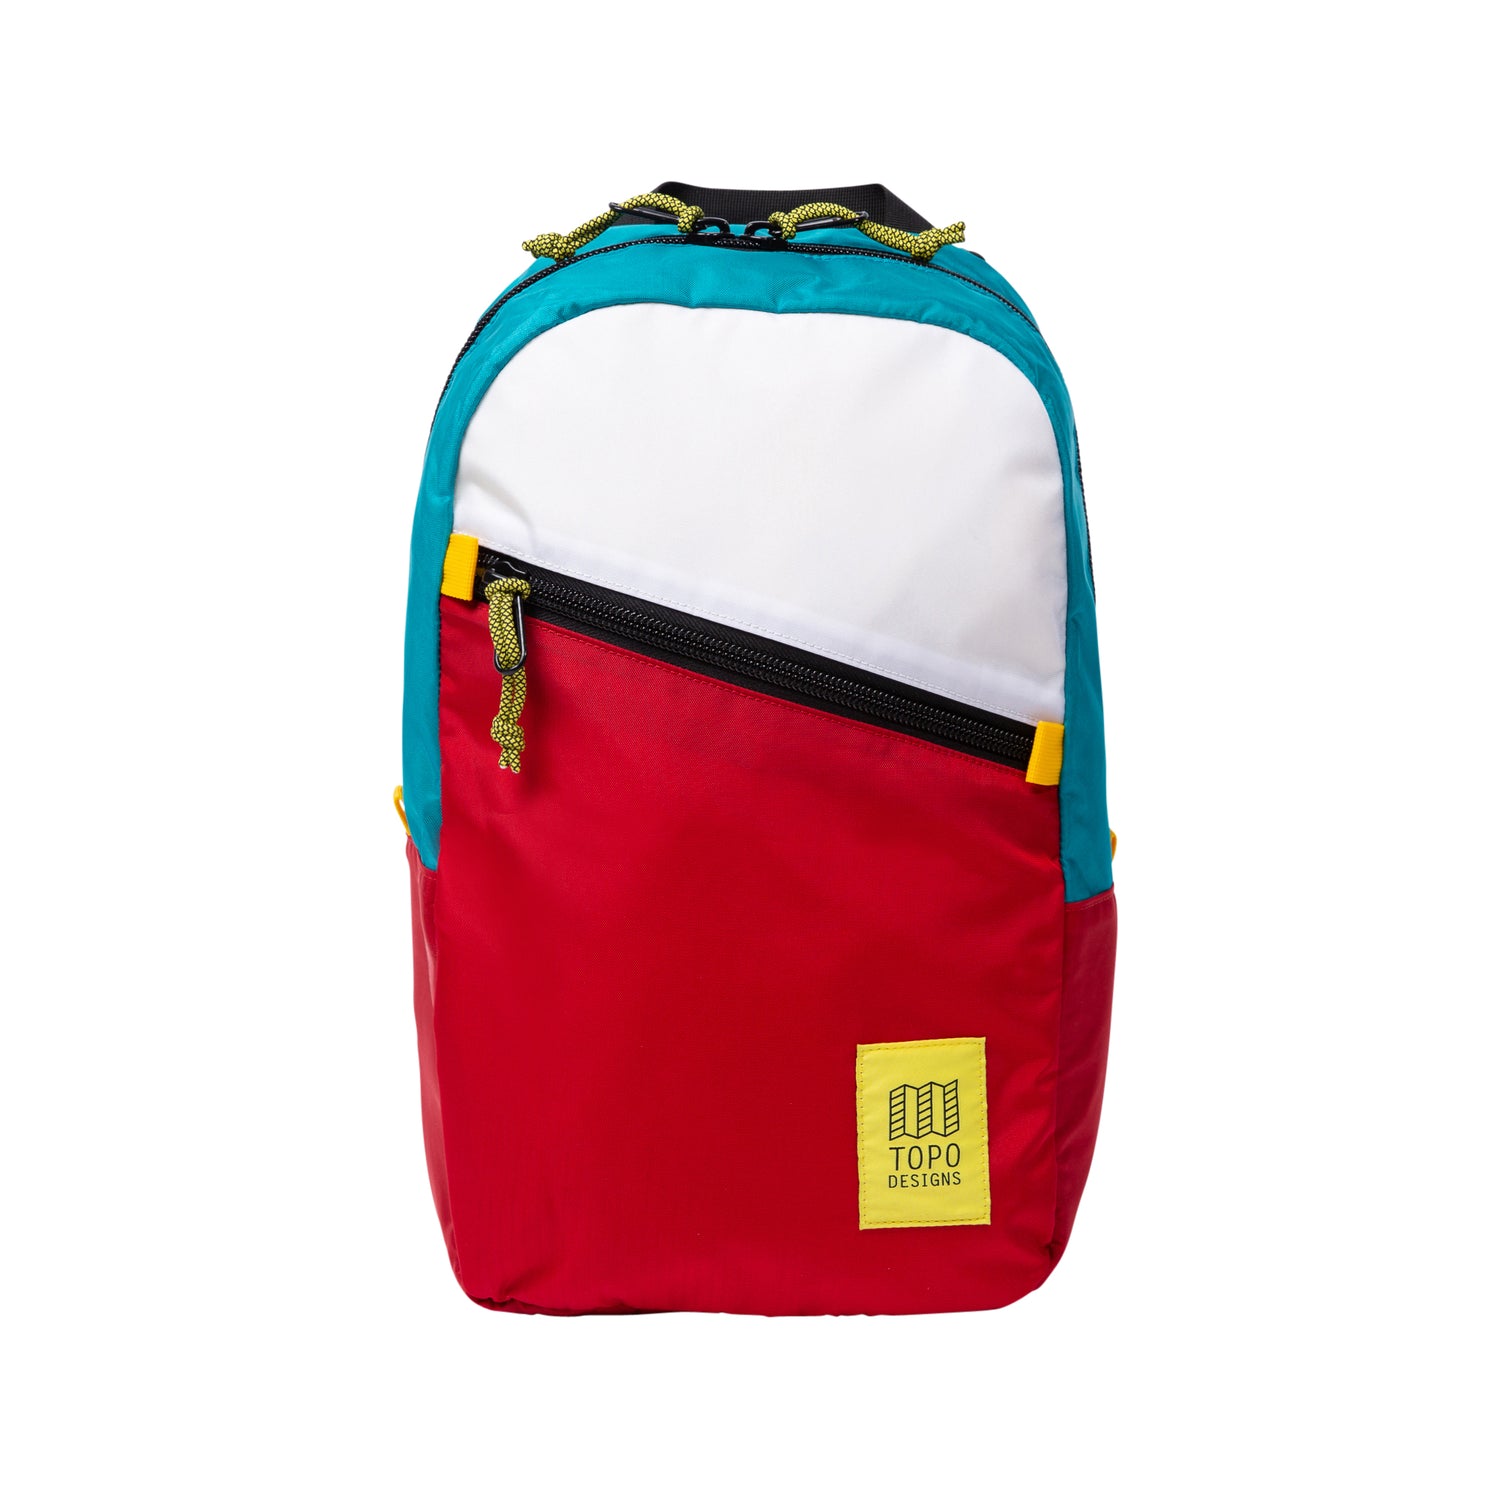 Topo Designs Light Pack - White/Red/Turquoise